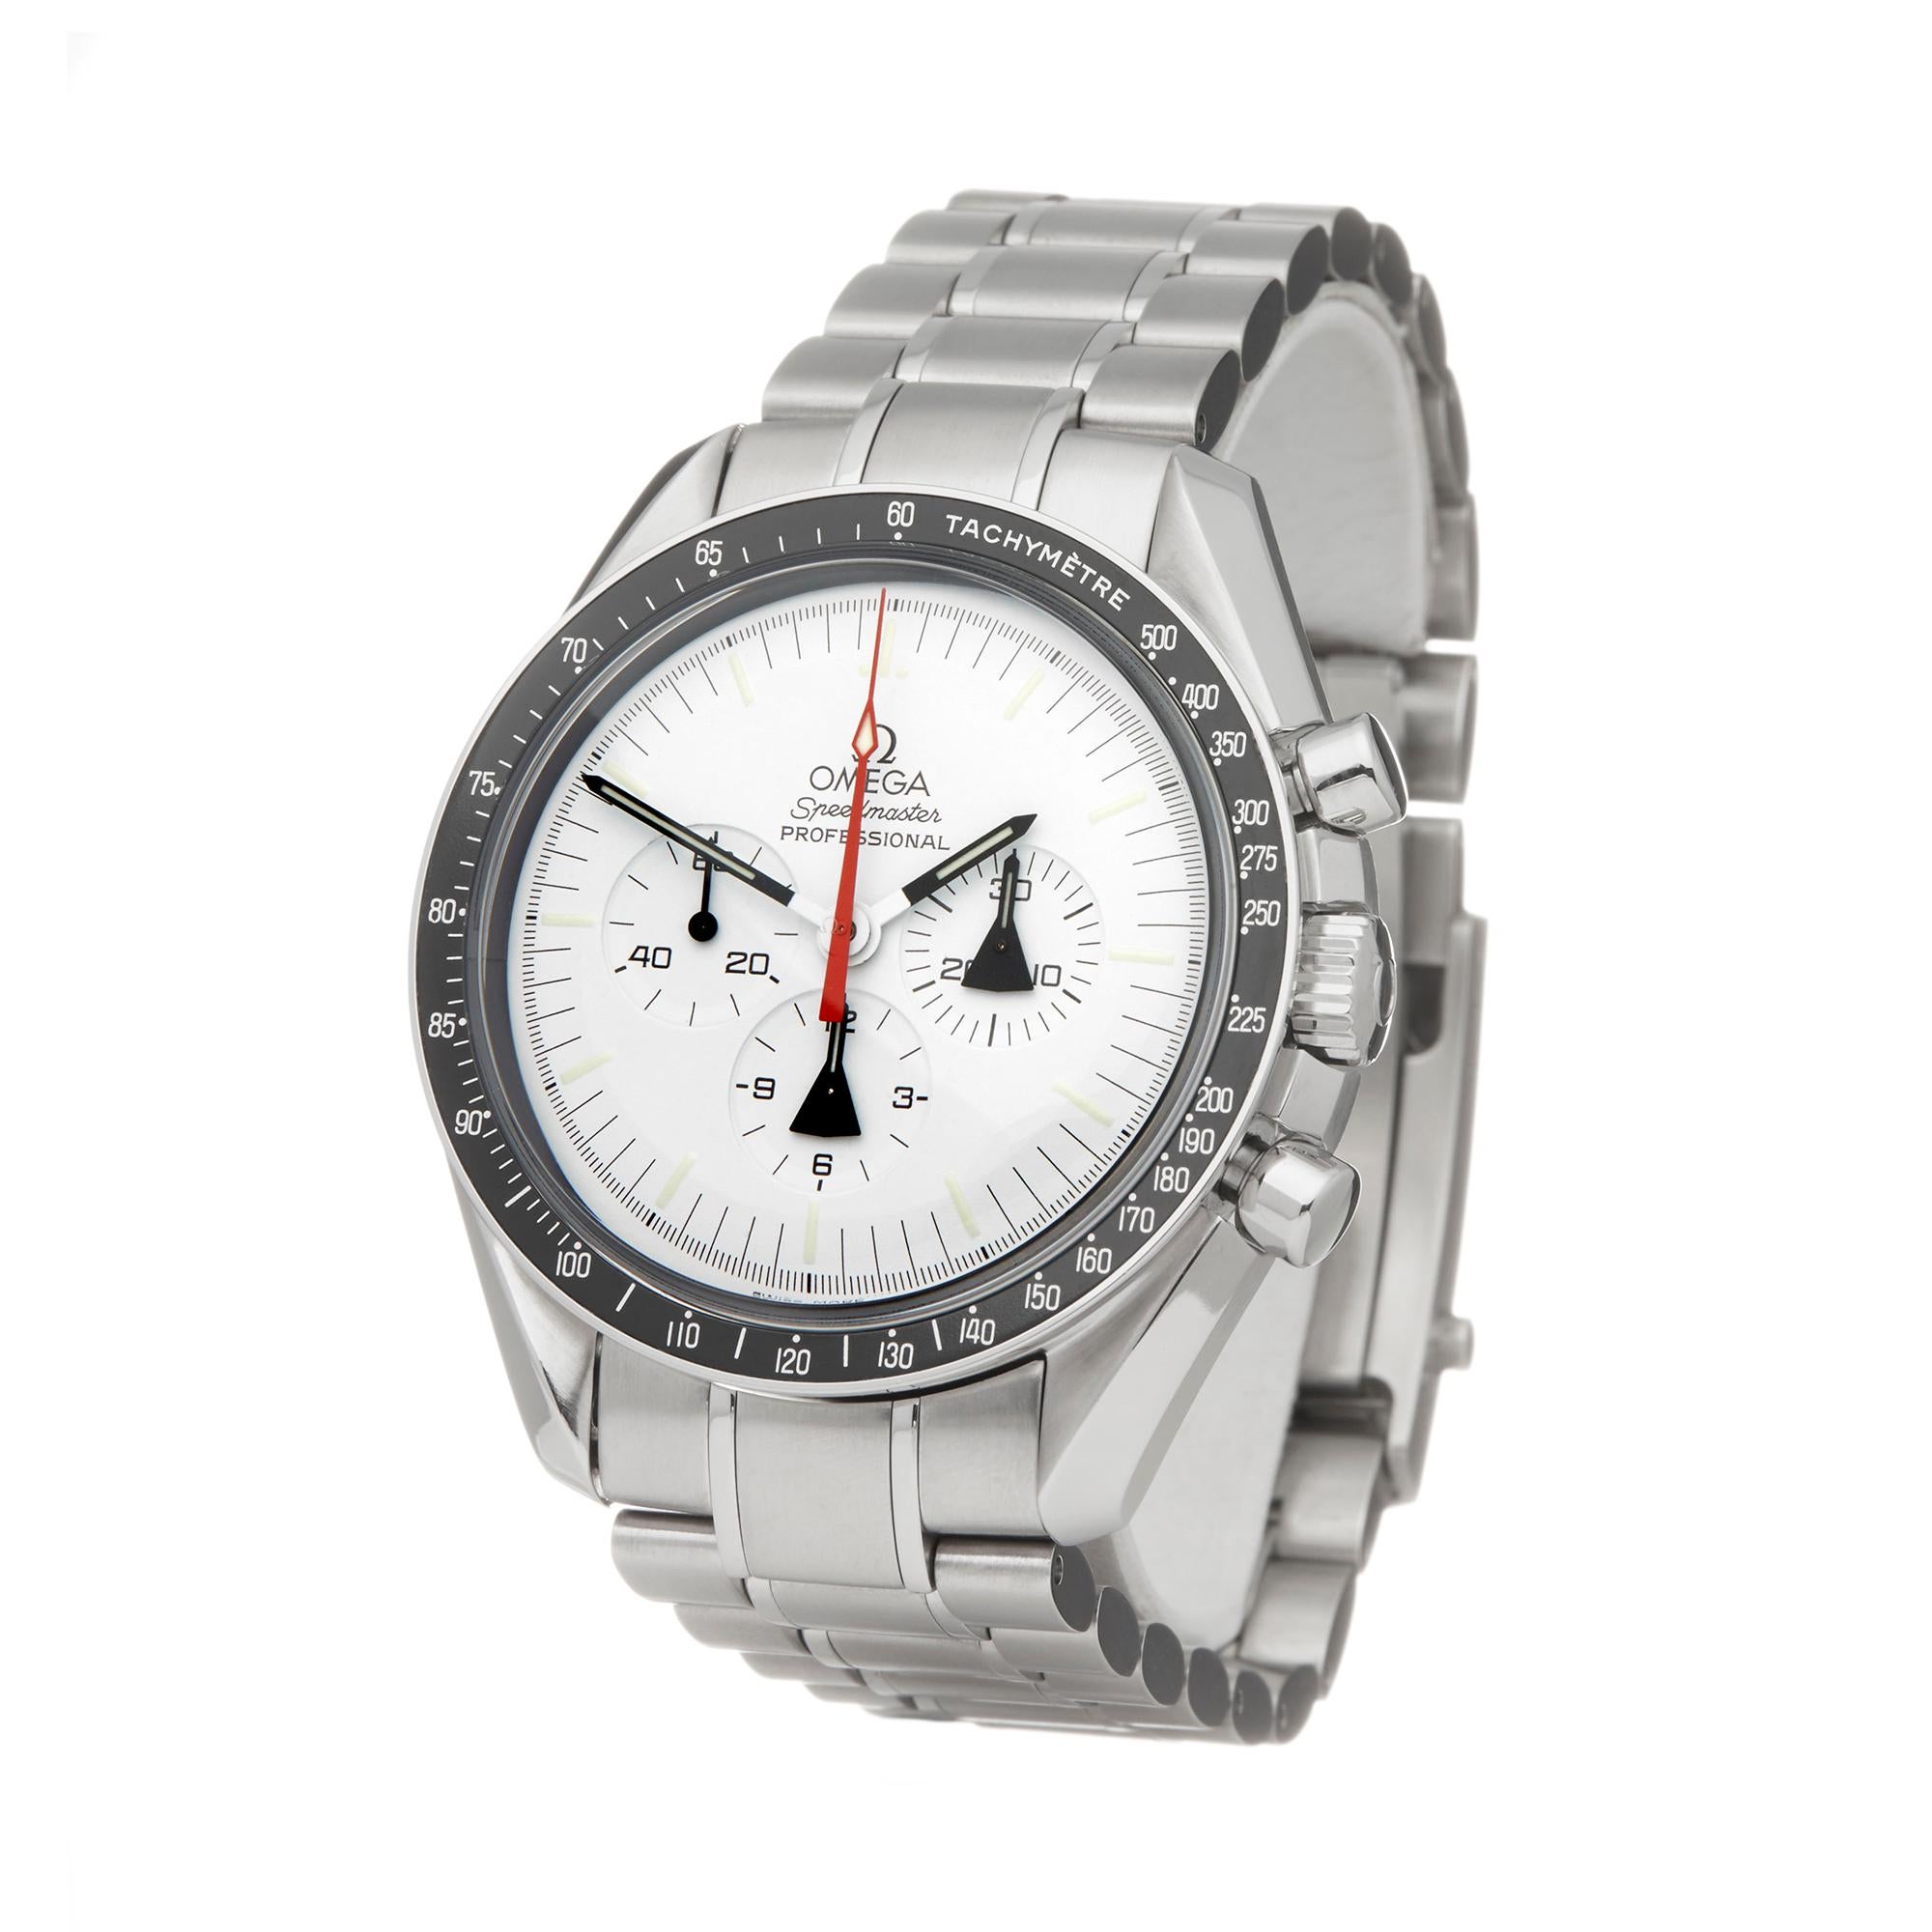 Reference: W6013
Manufacturer: Omega
Model: Speedmaster
Model Reference:31132423004001
Age: 20th November 2008
Gender: Men's
Box and Papers: Box, Manuals, Guarantee, Service Pouch and Service Papers dated 28th March 2019
Dial: White Baton
Glass: